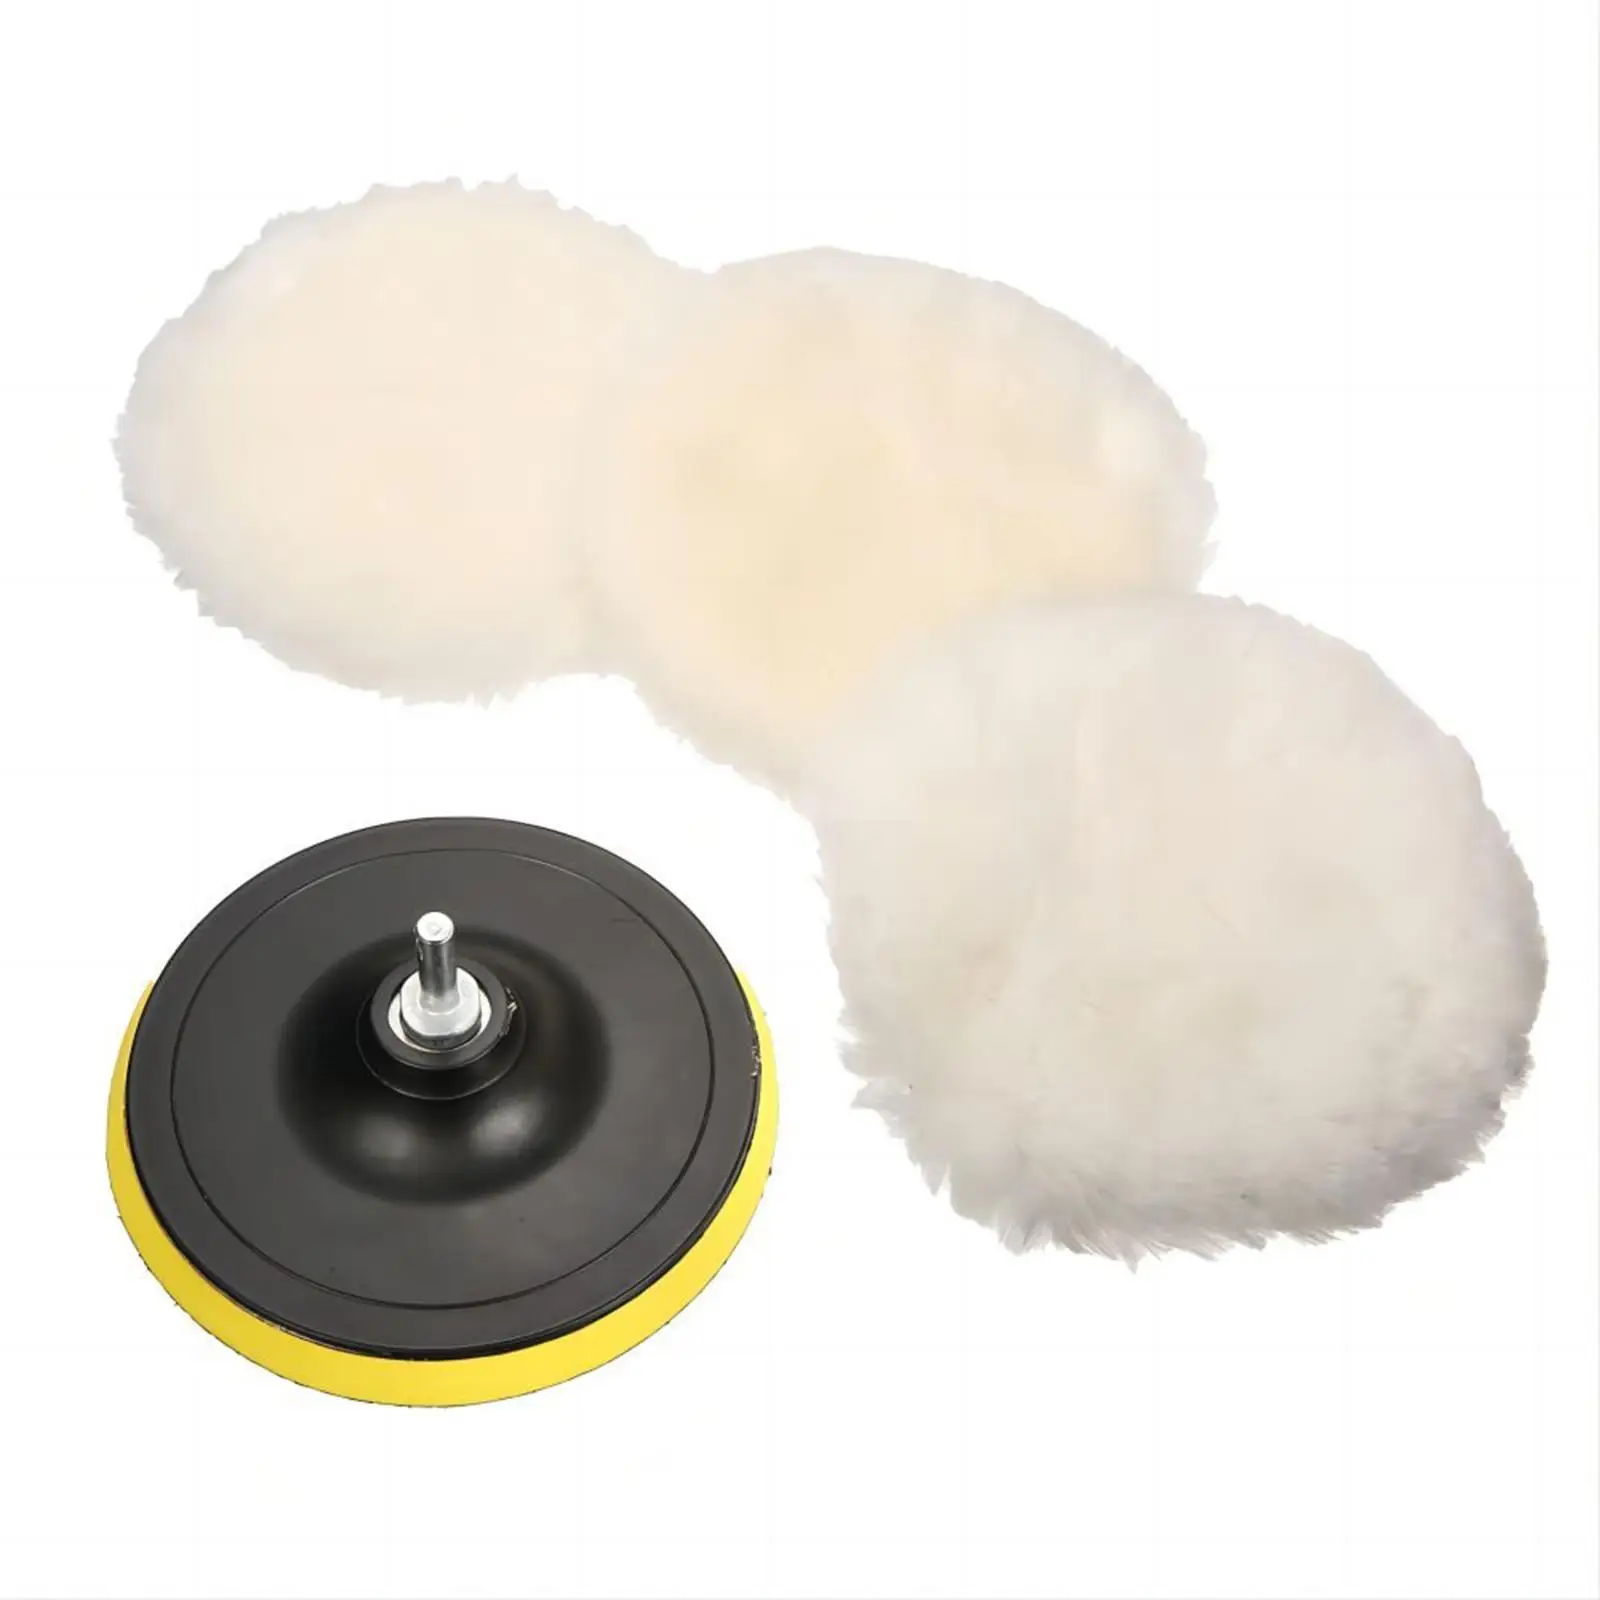 5Pcs Buffing Pads with Adapter Easy to Install Exterior Care Tool for Waxing Car Detailing Motorcycle Washing Polishing